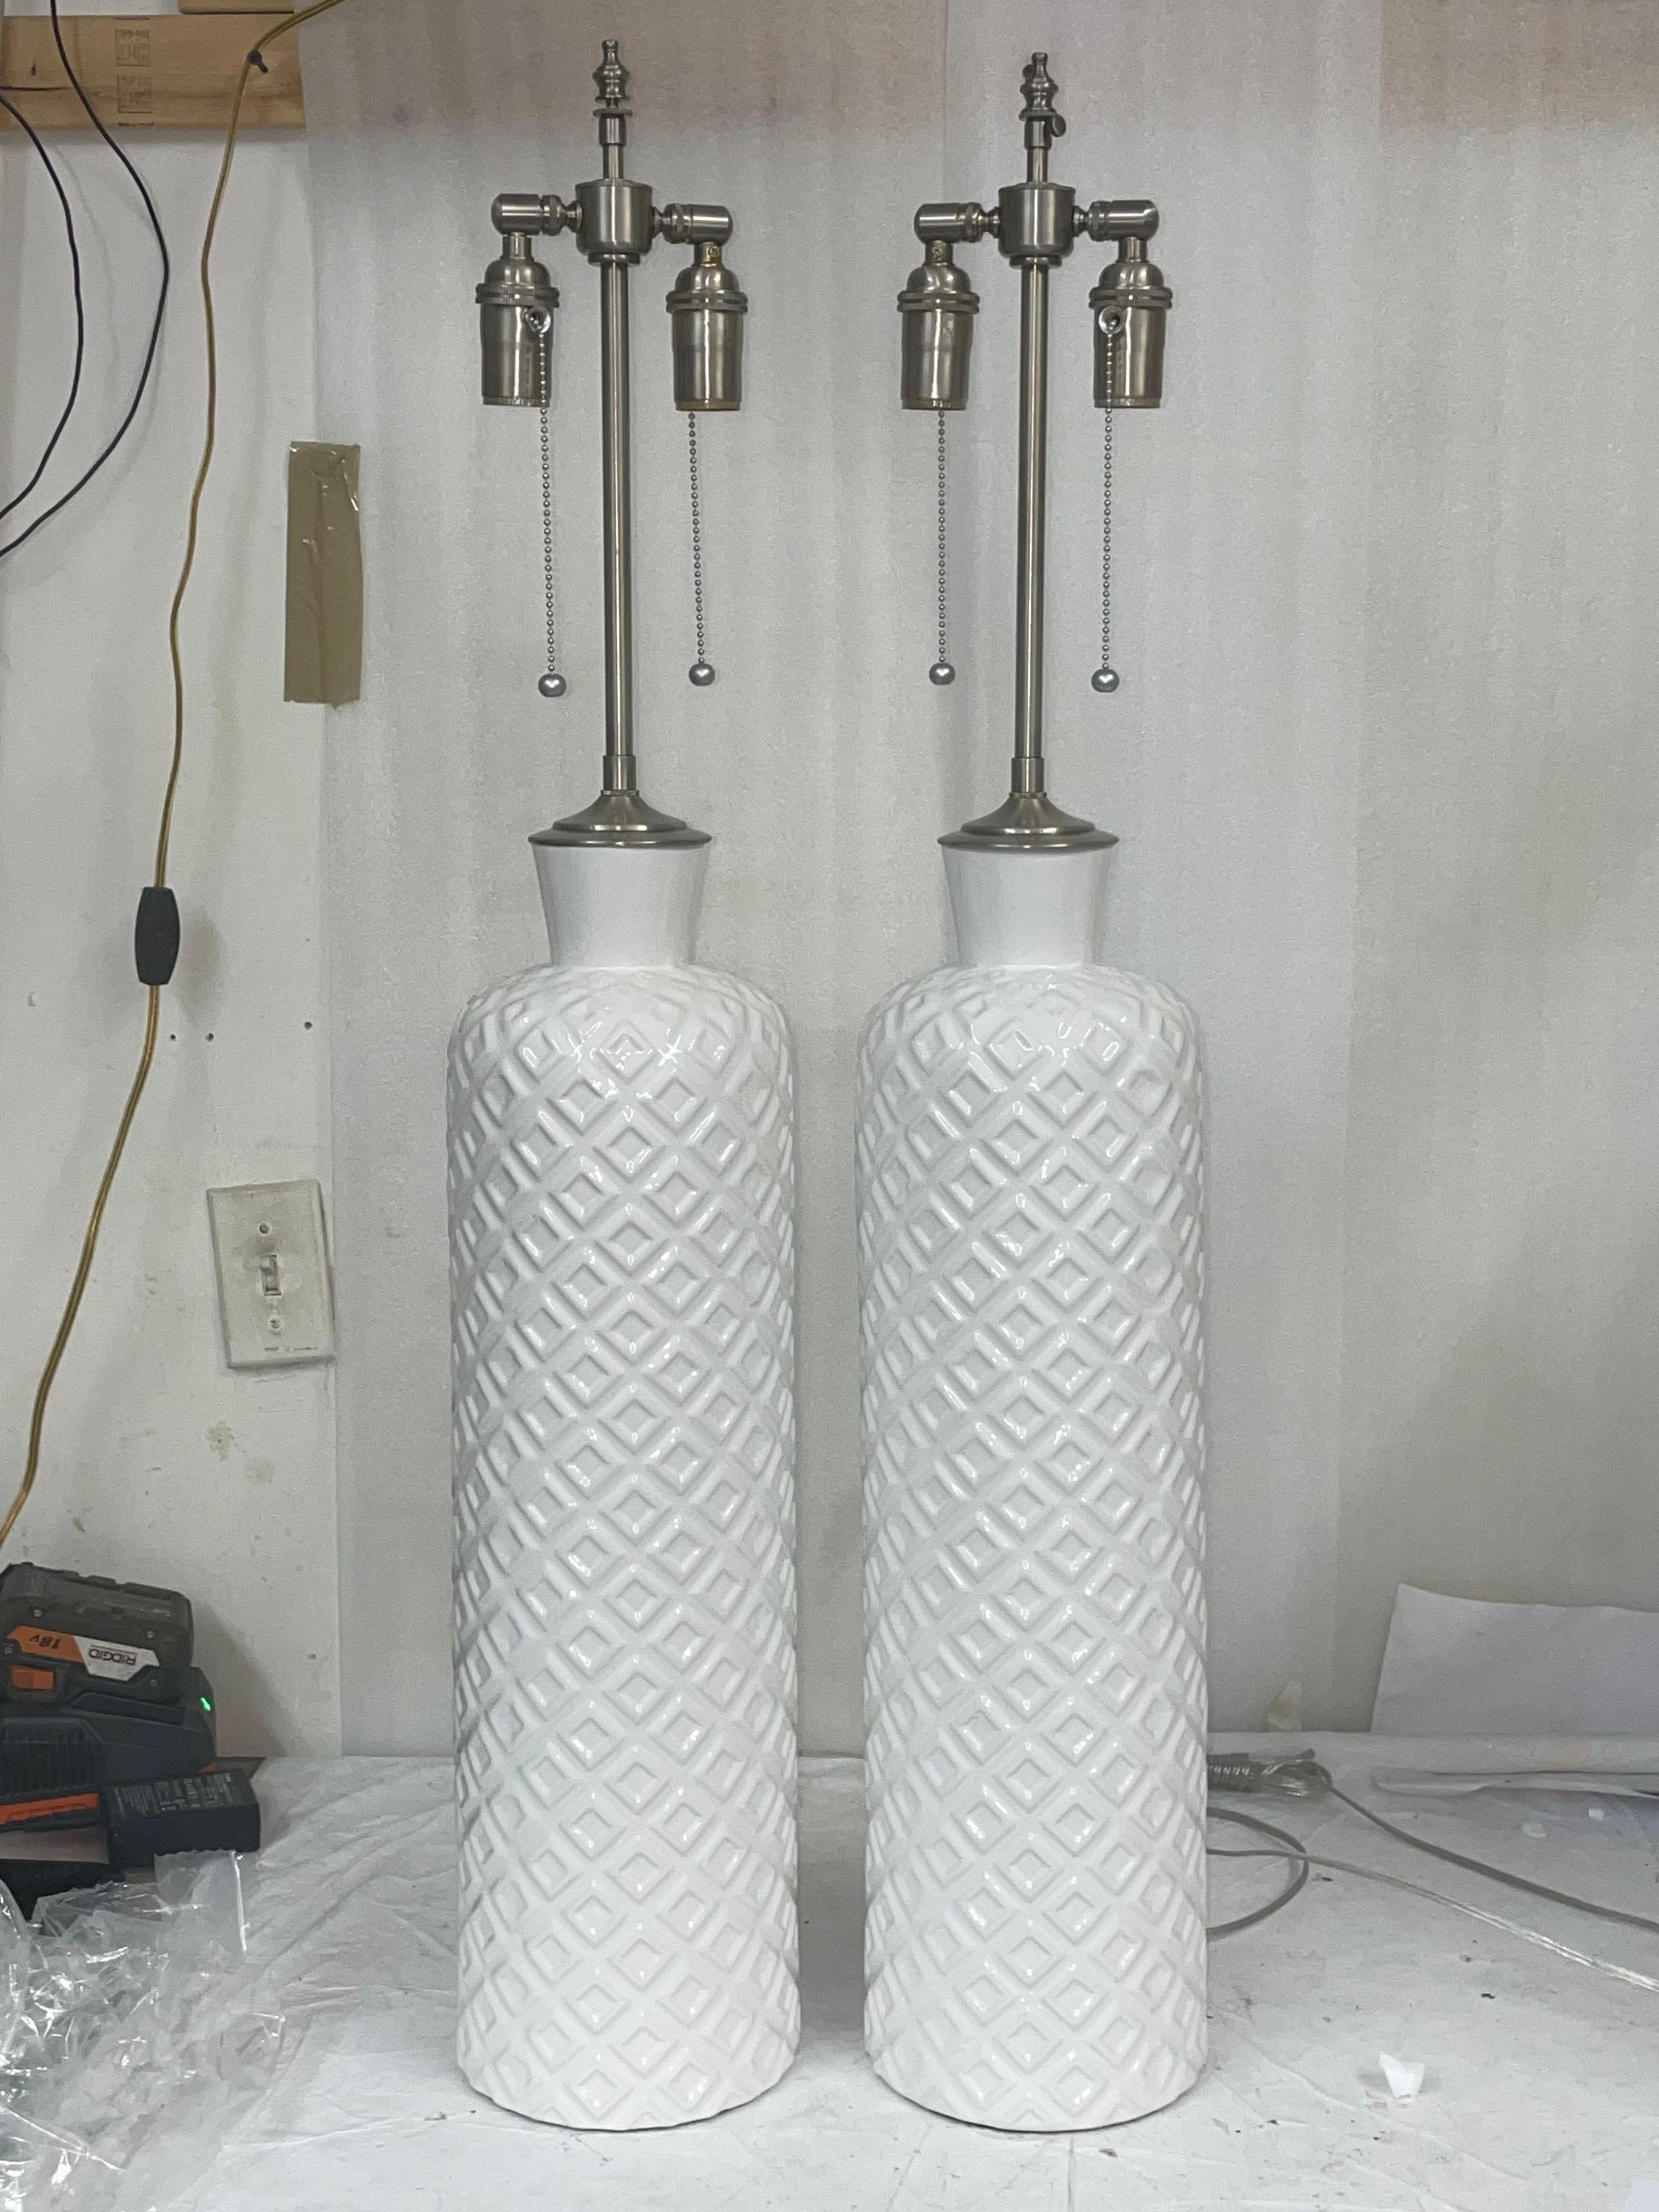 Pair of Elegant Glazed Ceramic Geometric Patterned Table Lamps In Excellent Condition For Sale In Bronx, NY